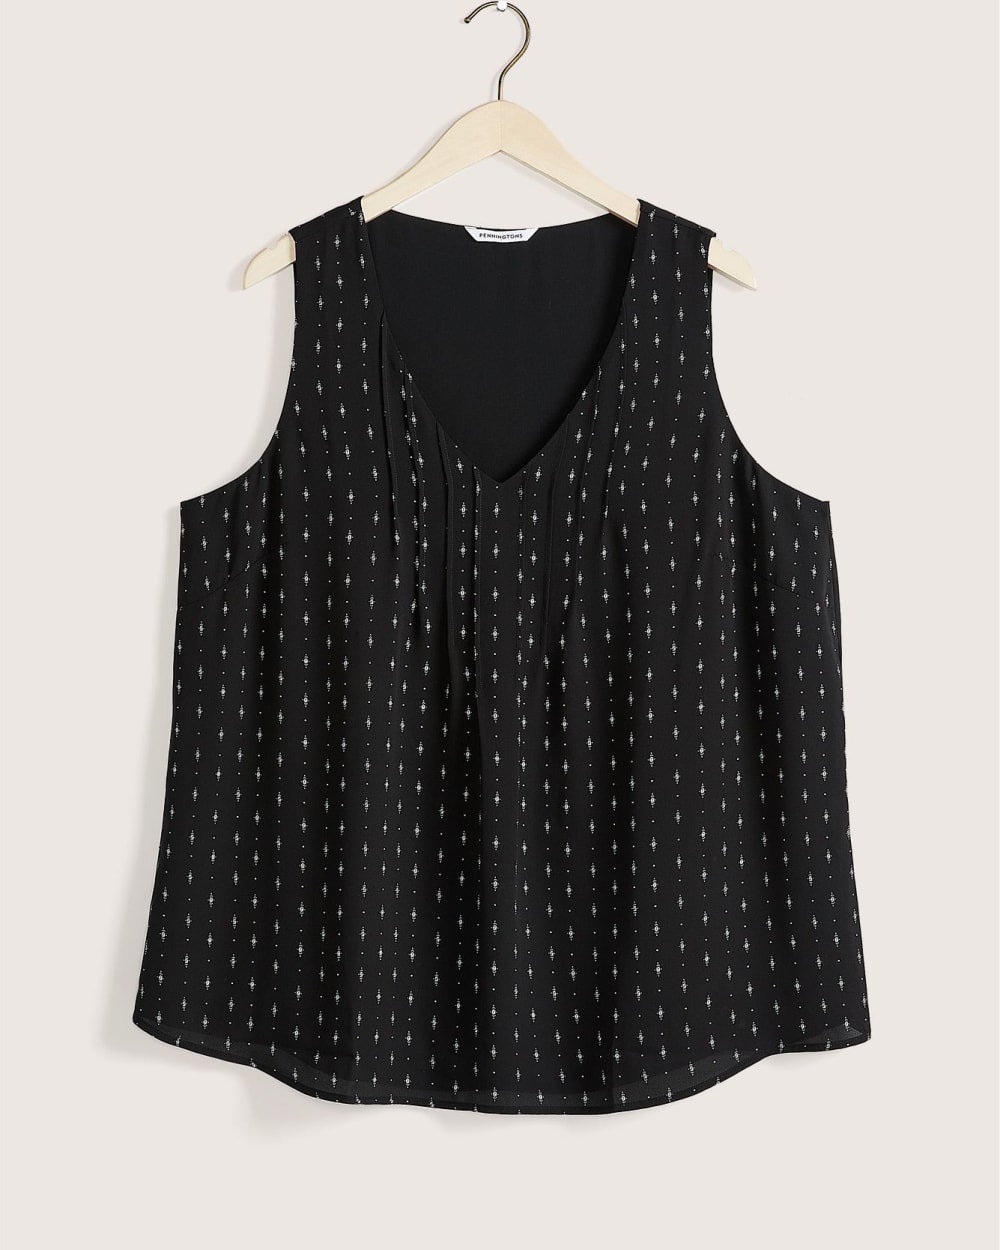 Responsible, Printed Sleeveless Blouse with Pintucks at Neckline ...